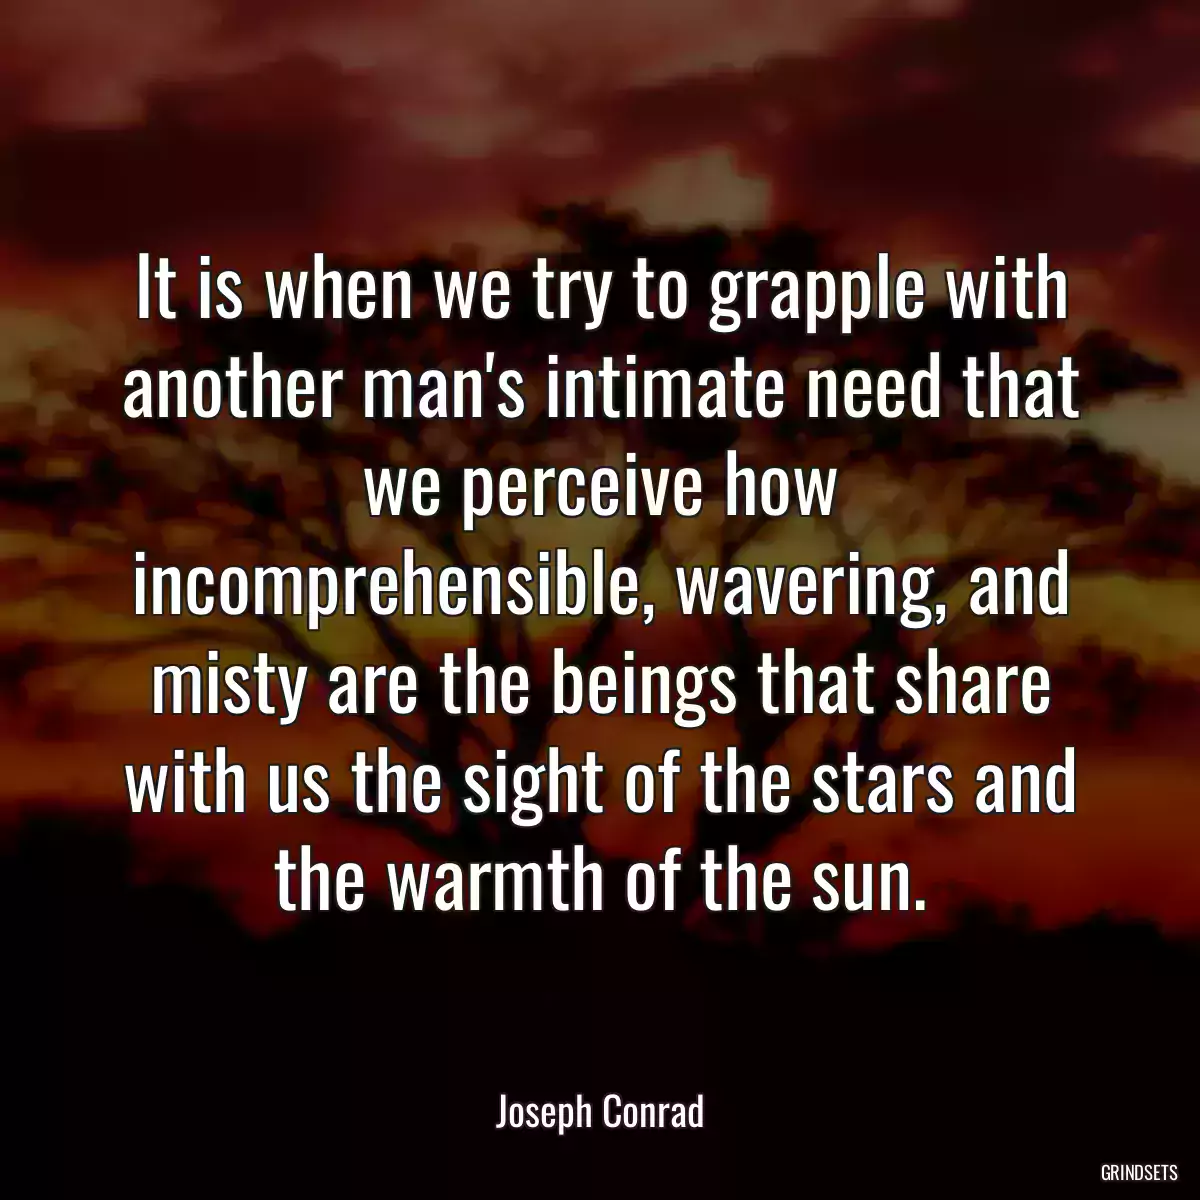 It is when we try to grapple with another man\'s intimate need that we perceive how incomprehensible, wavering, and misty are the beings that share with us the sight of the stars and the warmth of the sun.